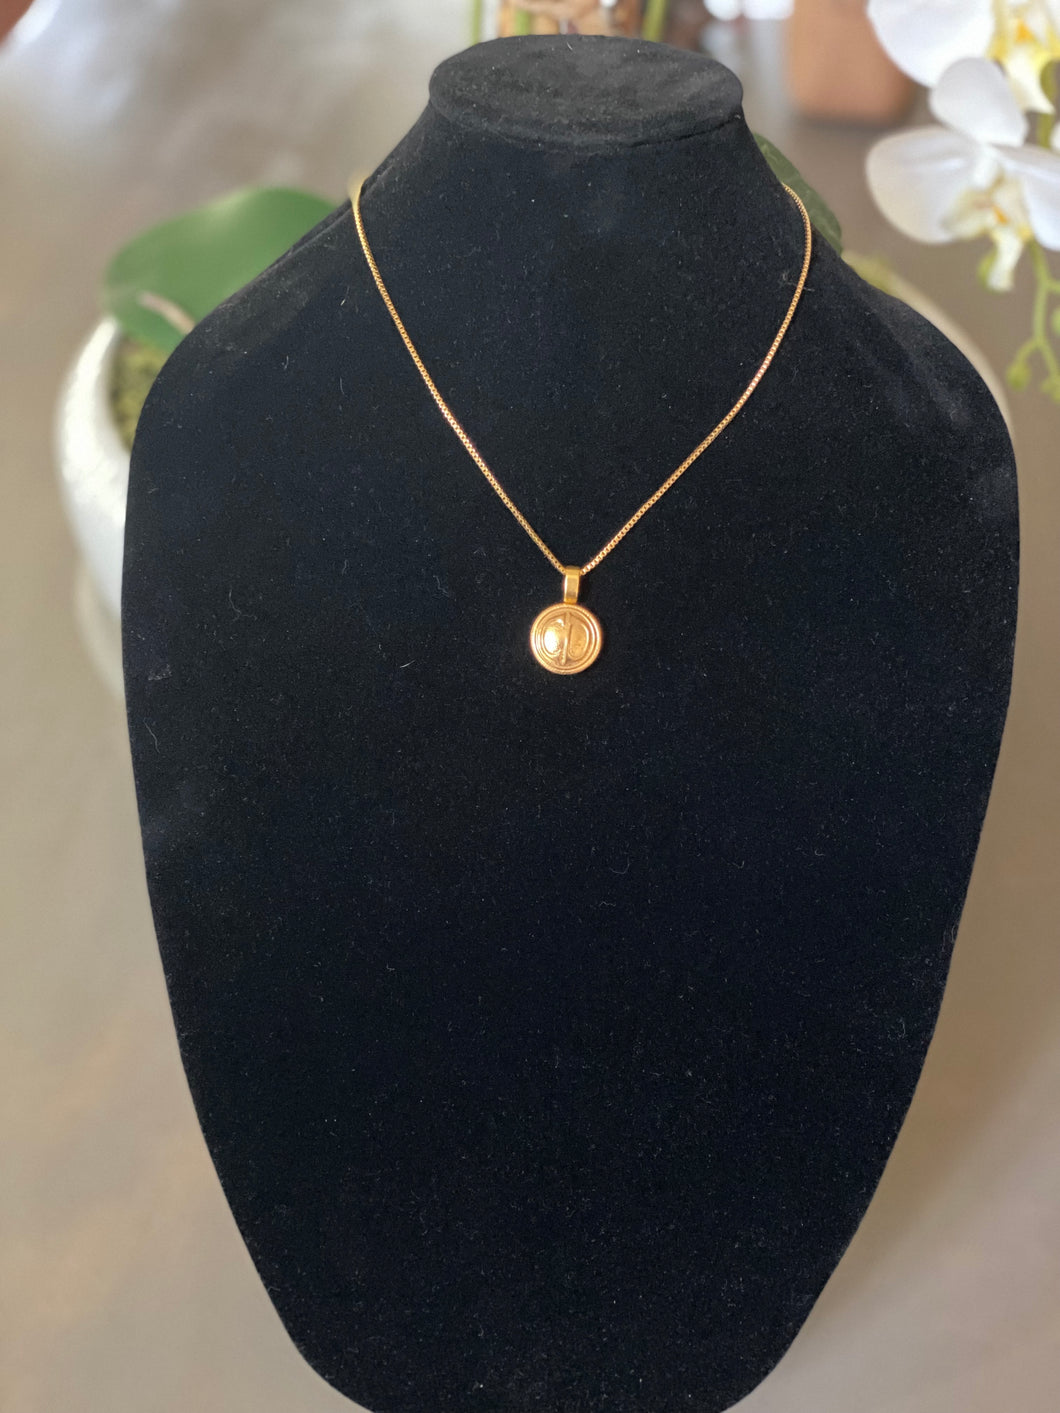 Pendant Necklace with Gold Tone Chain